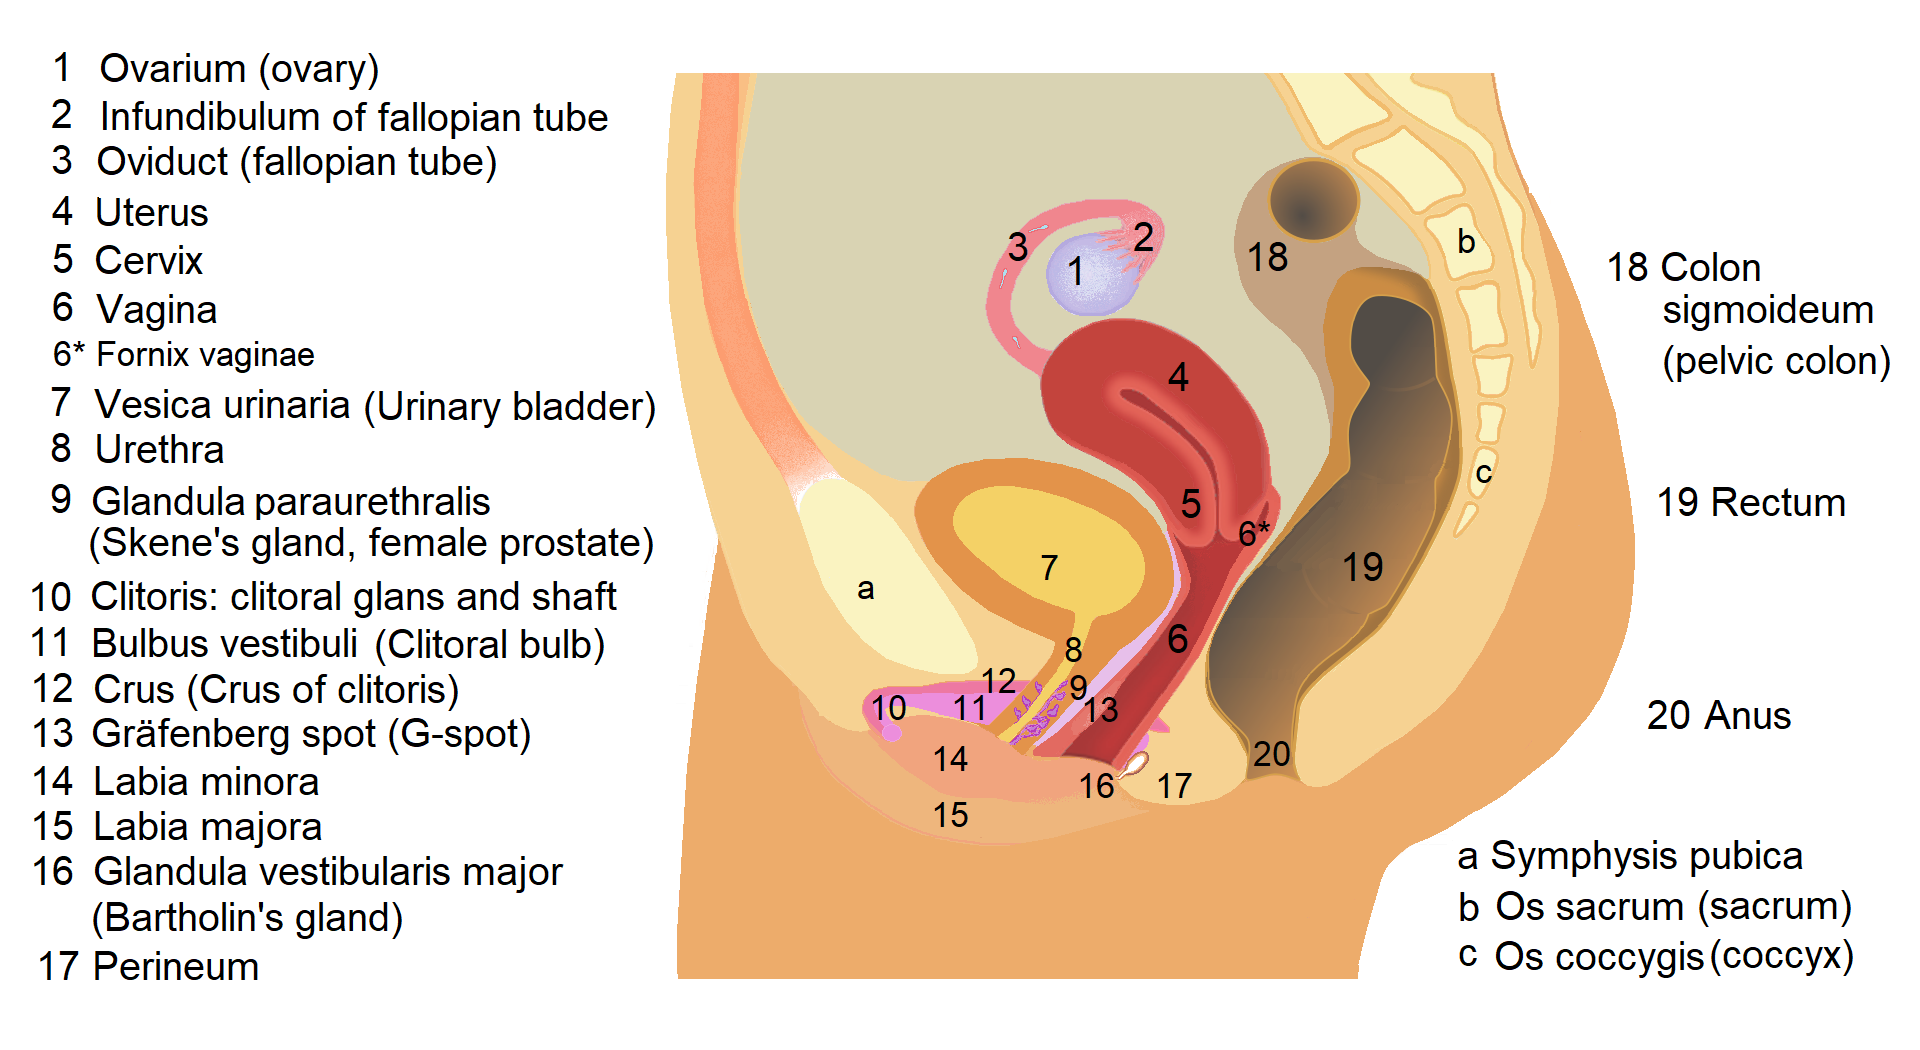 Human Female Reproductive System: Organs, Structure, Functions